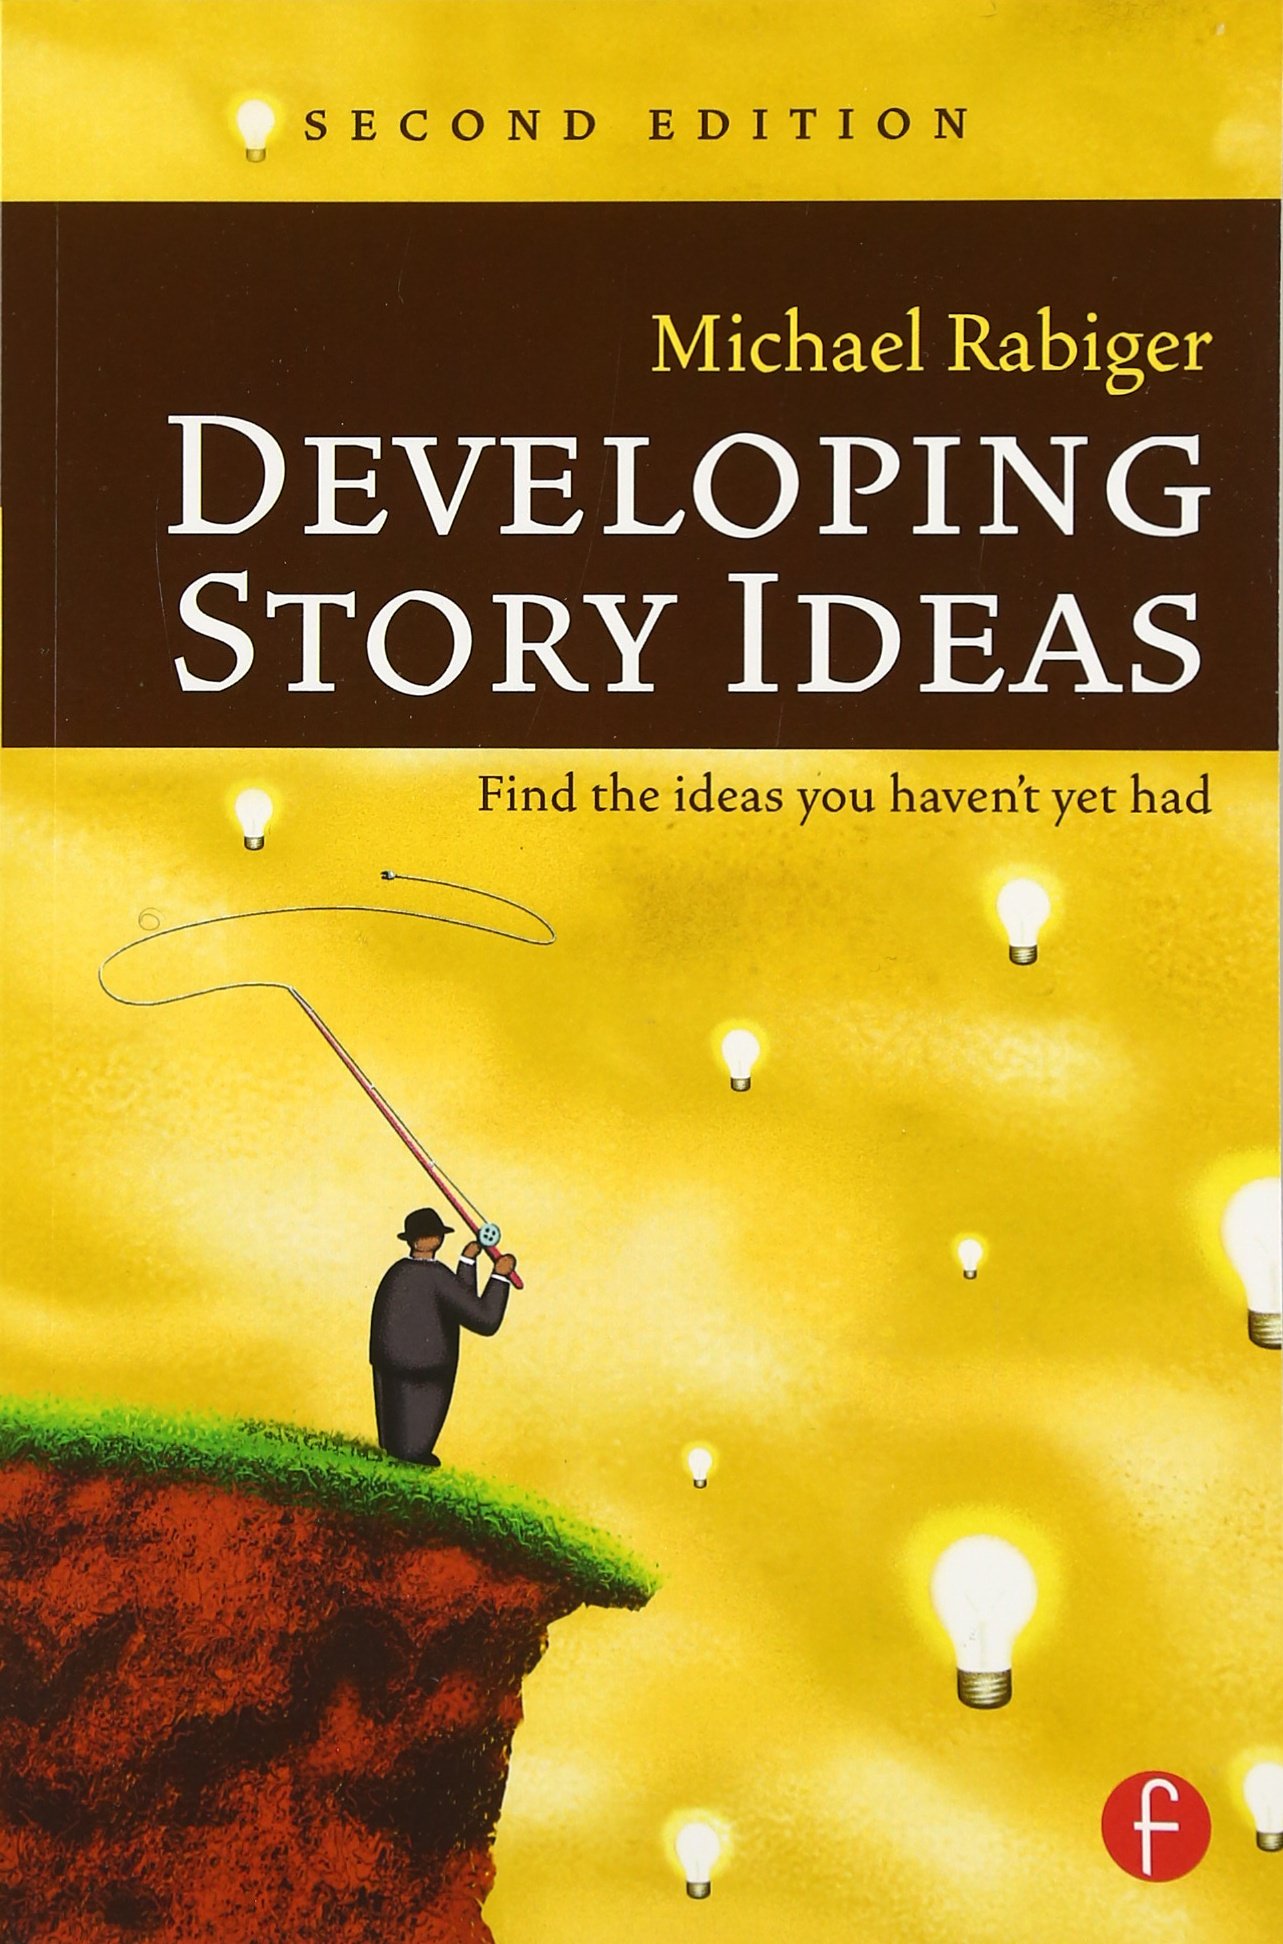 Developing Story Ideas: Find the ideas you haven't yet had - PDF